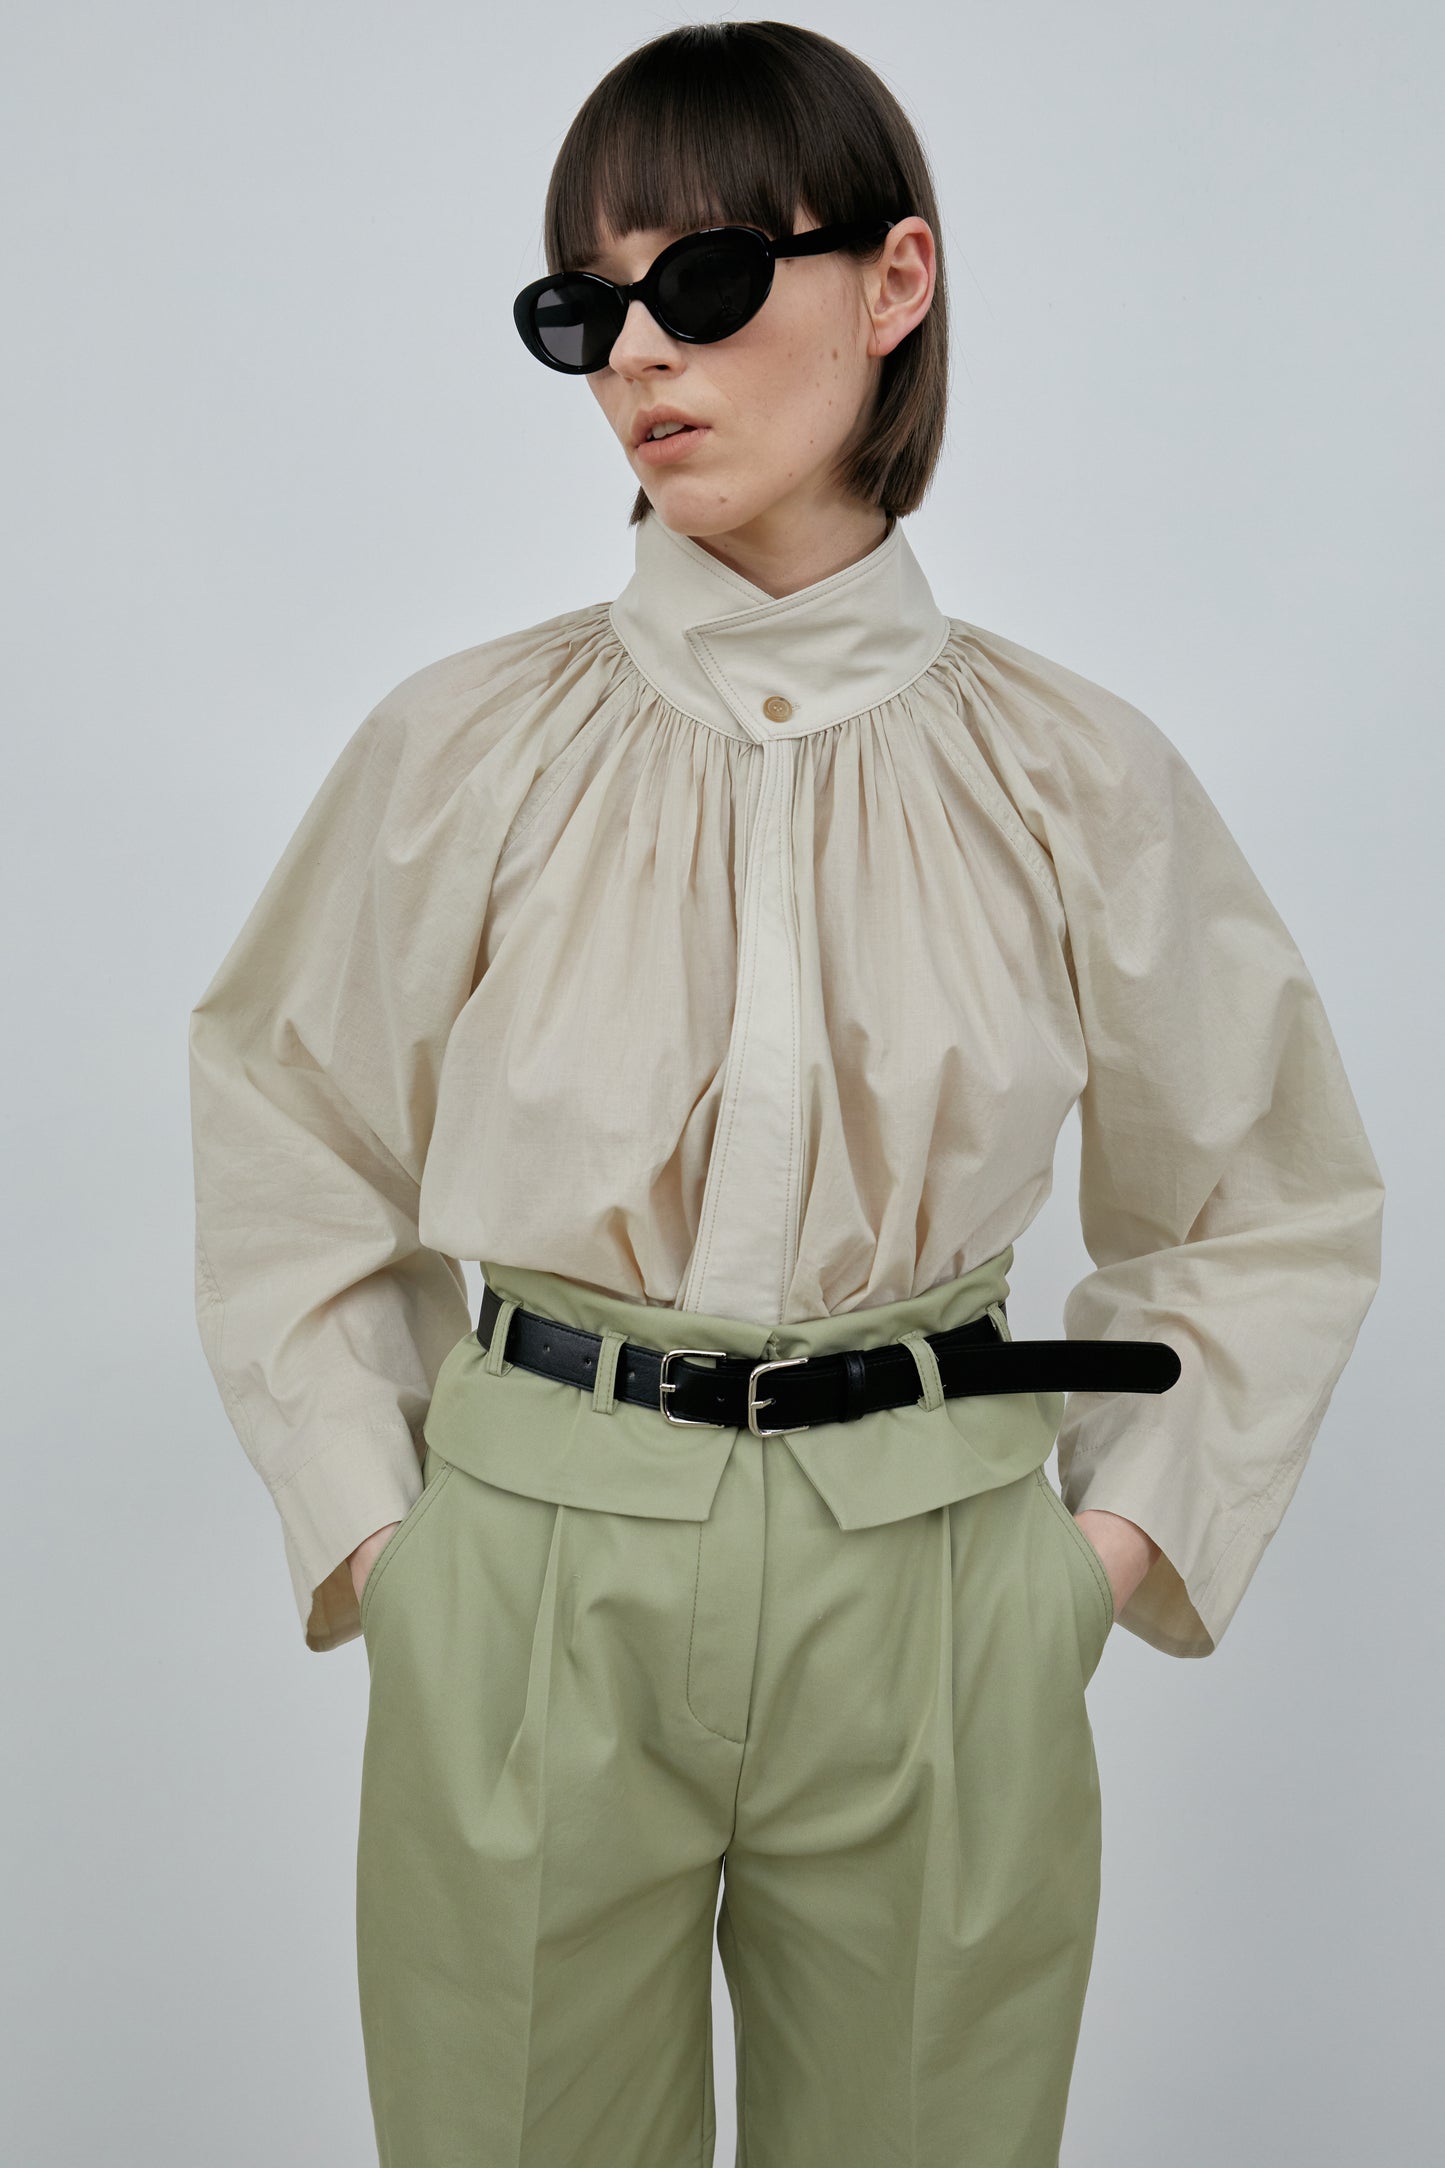 Gathered Neck Pleated Blouse, Beige